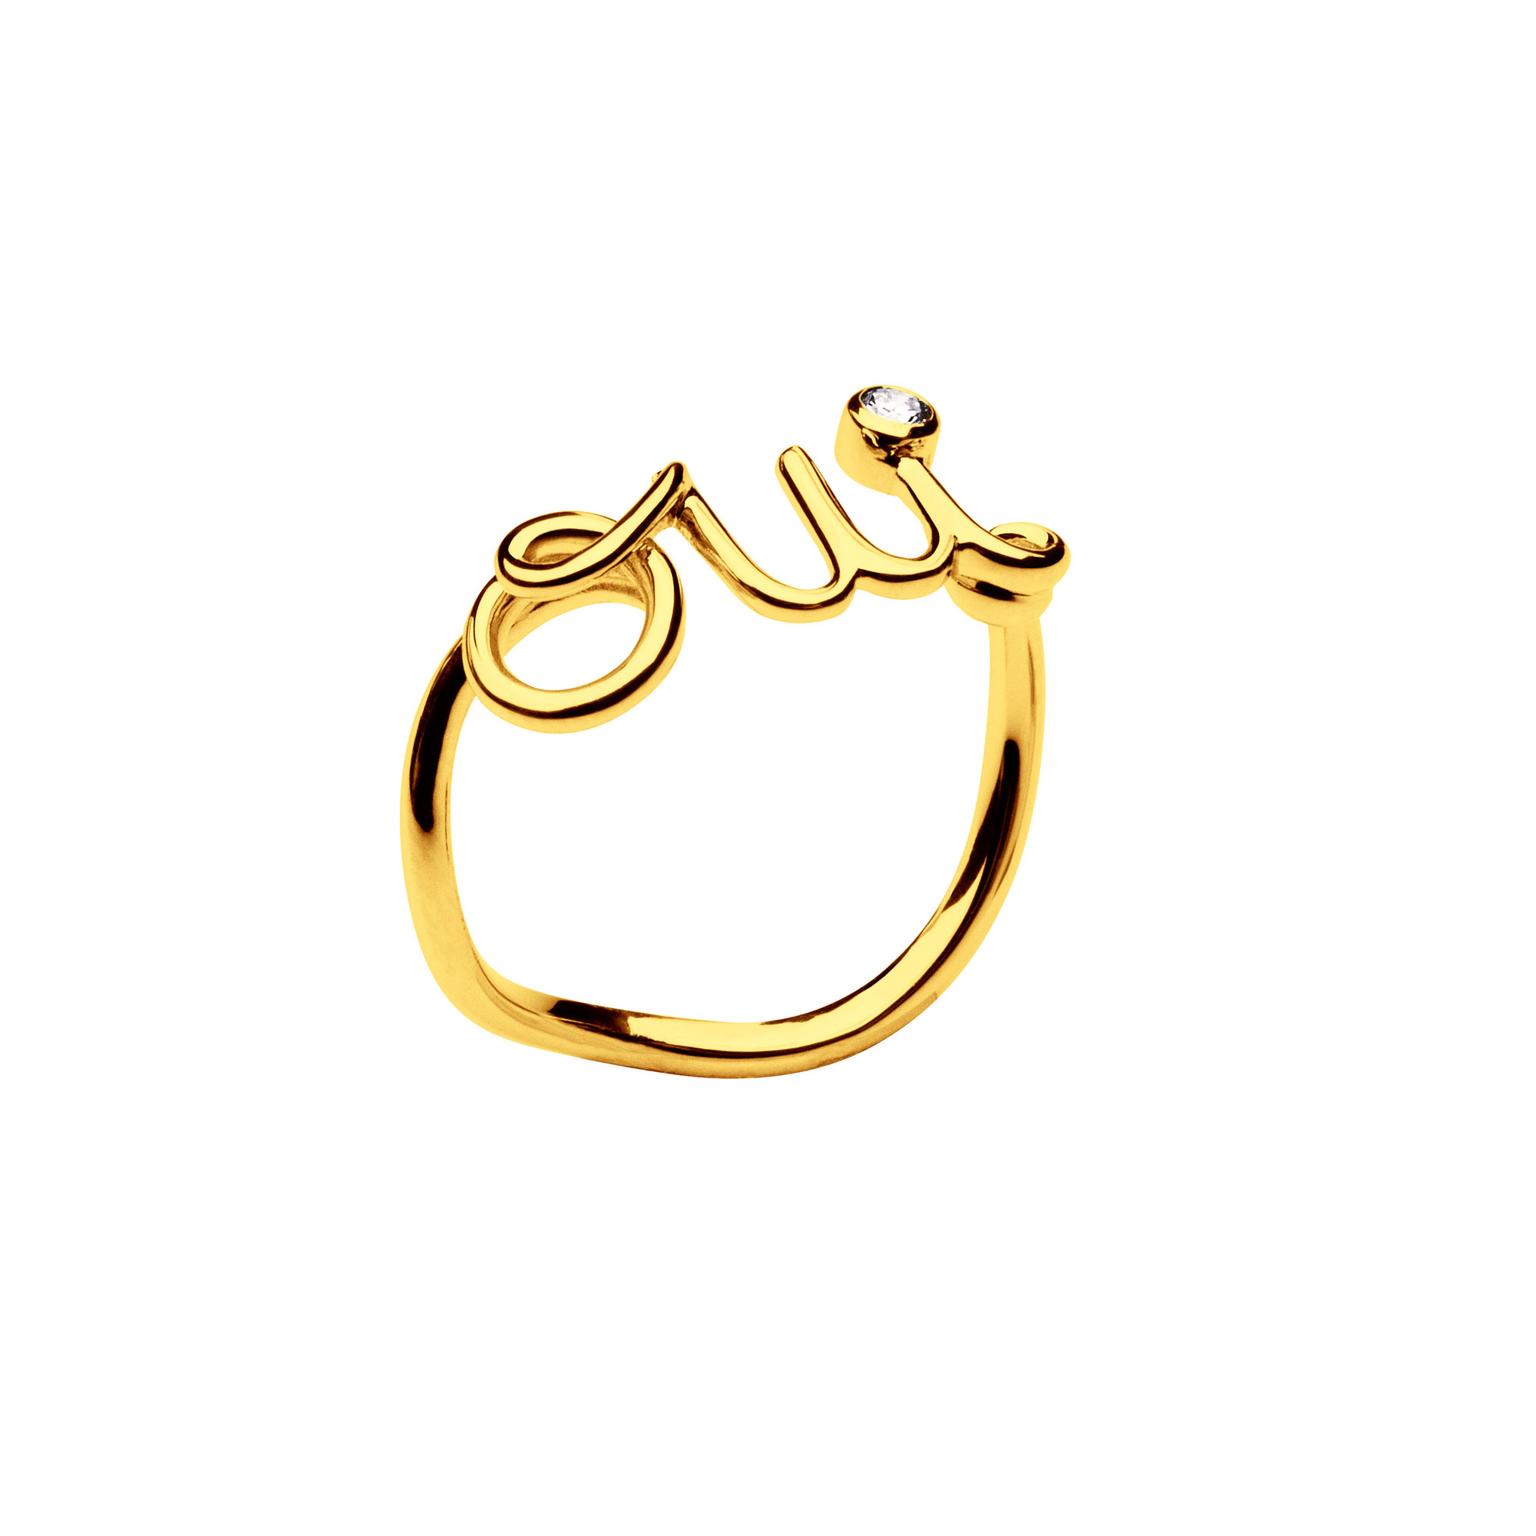 Dior yellow gold and diamond Oui ring